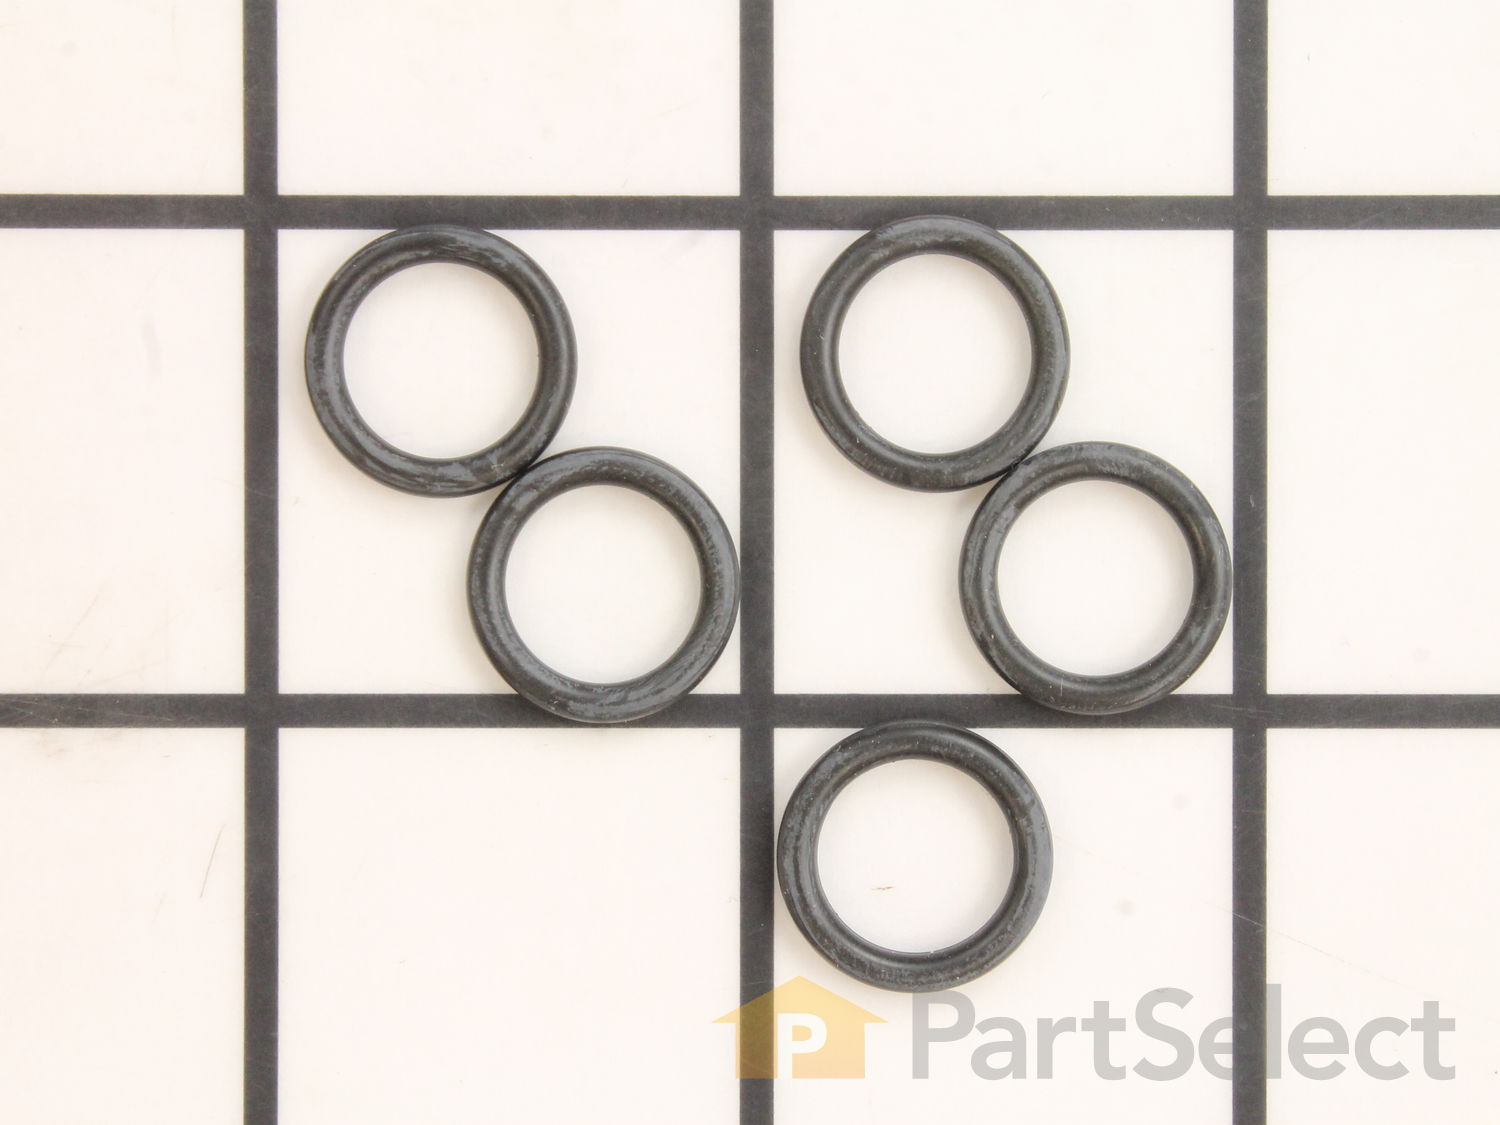 Karcher OEM Replacement O-Ring Set # 2.880-990.0 